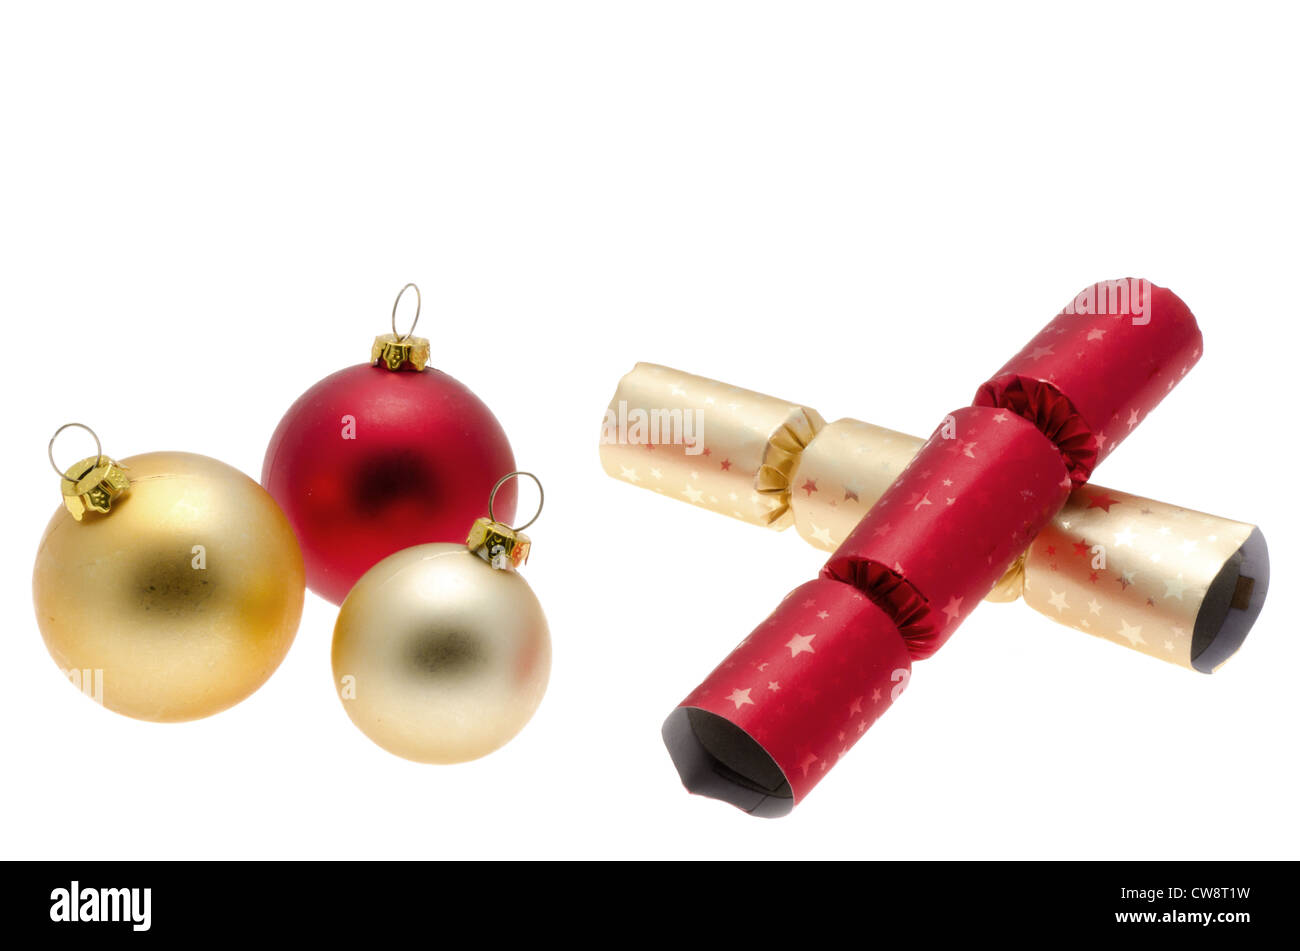 Christmas crackers and tree baubles - studio shot with a white background Stock Photo